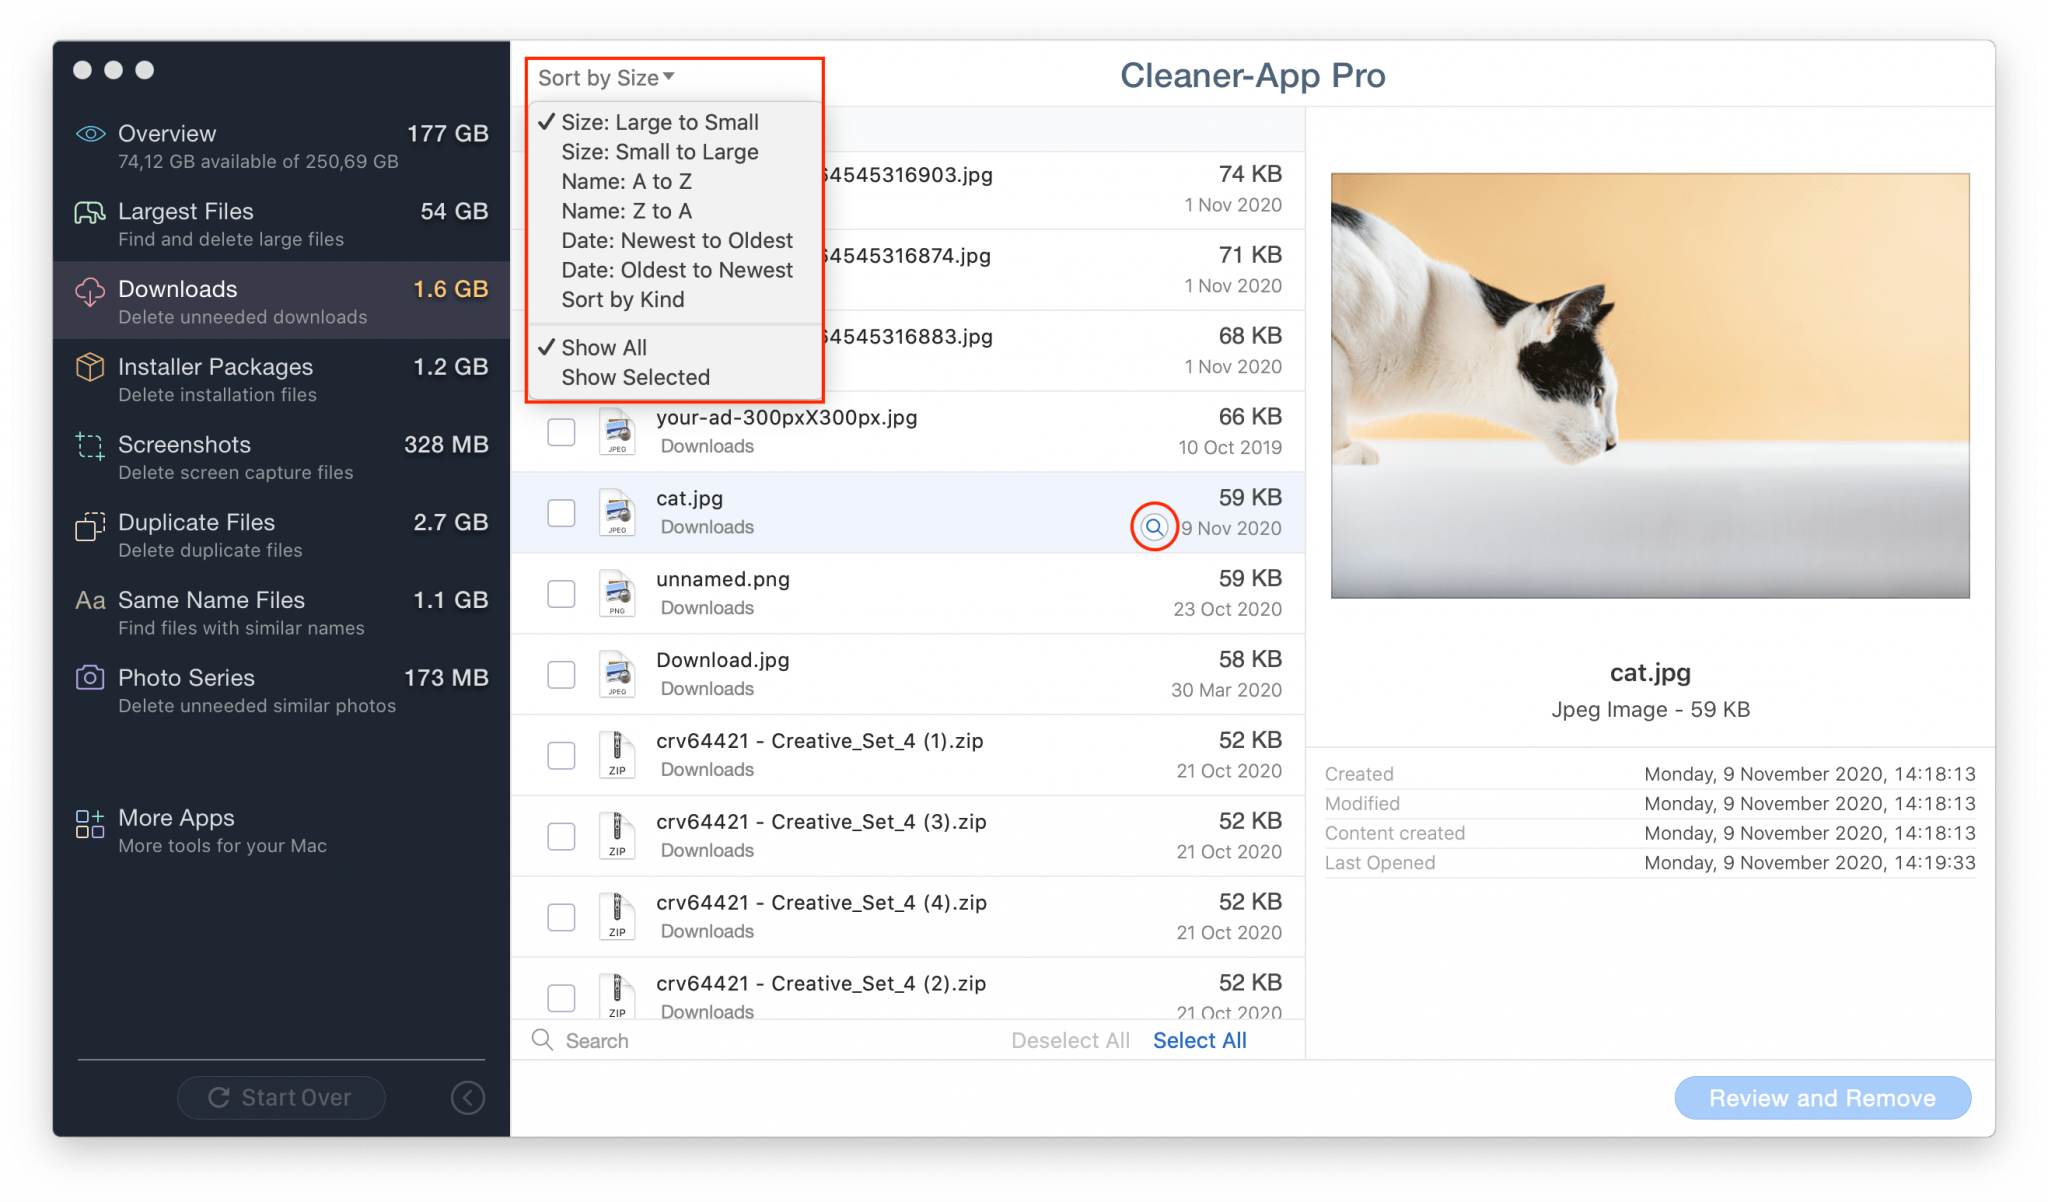 Annual Subscription Vs One Time Purchase Of Mac Cleaner App